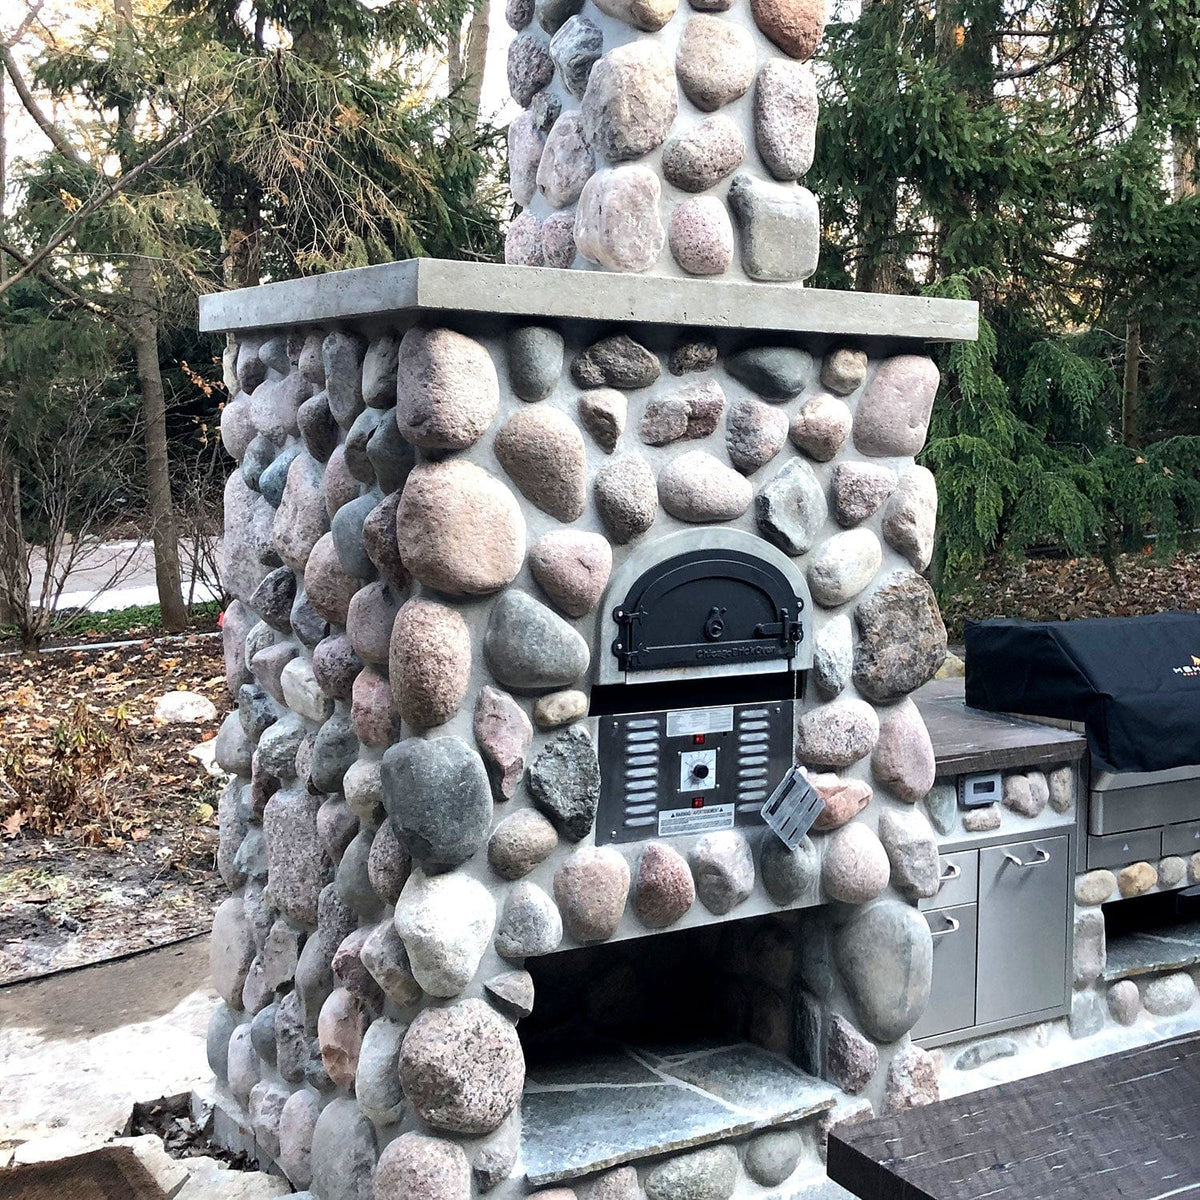 Chicago Brick Oven 35 1/4 Inch Built-In Hybrid Commercial Outdoor Pizza Oven DIY Kit